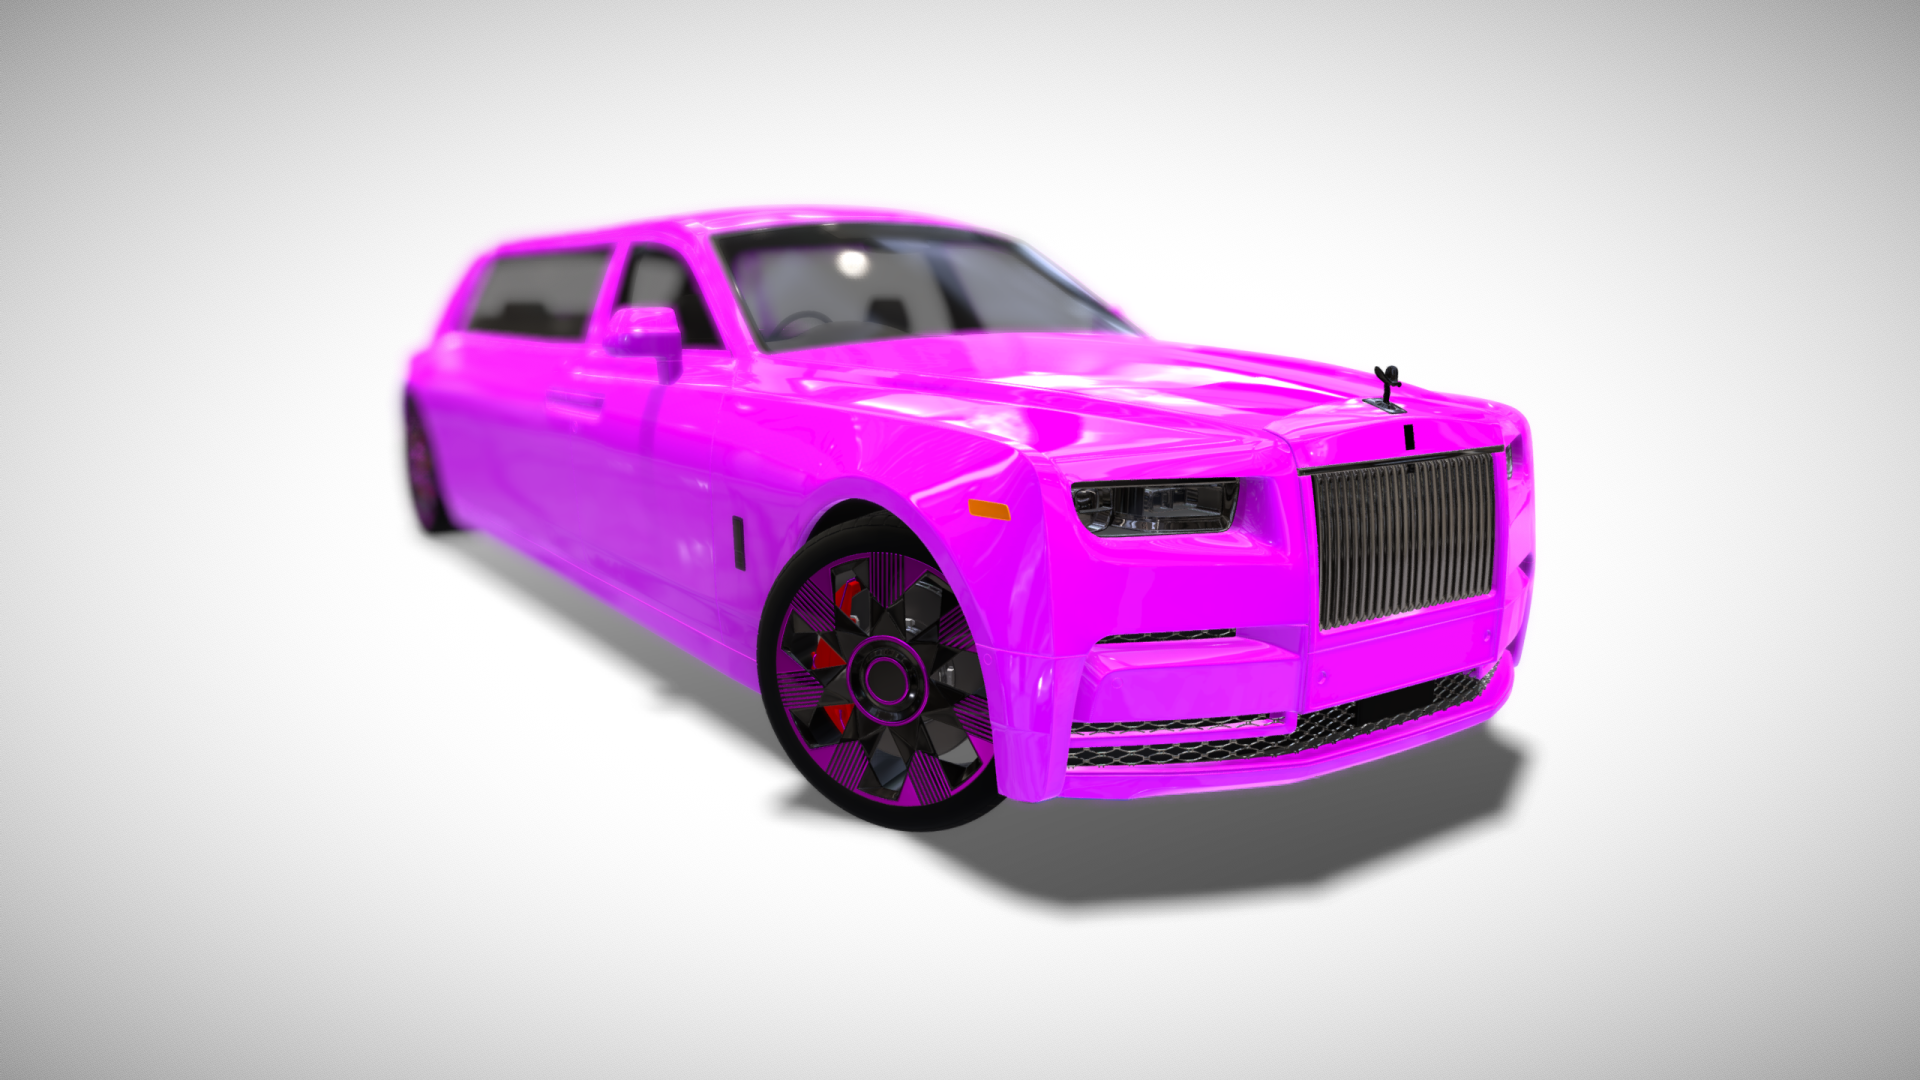 Rolls-Royce made a pink Ghost